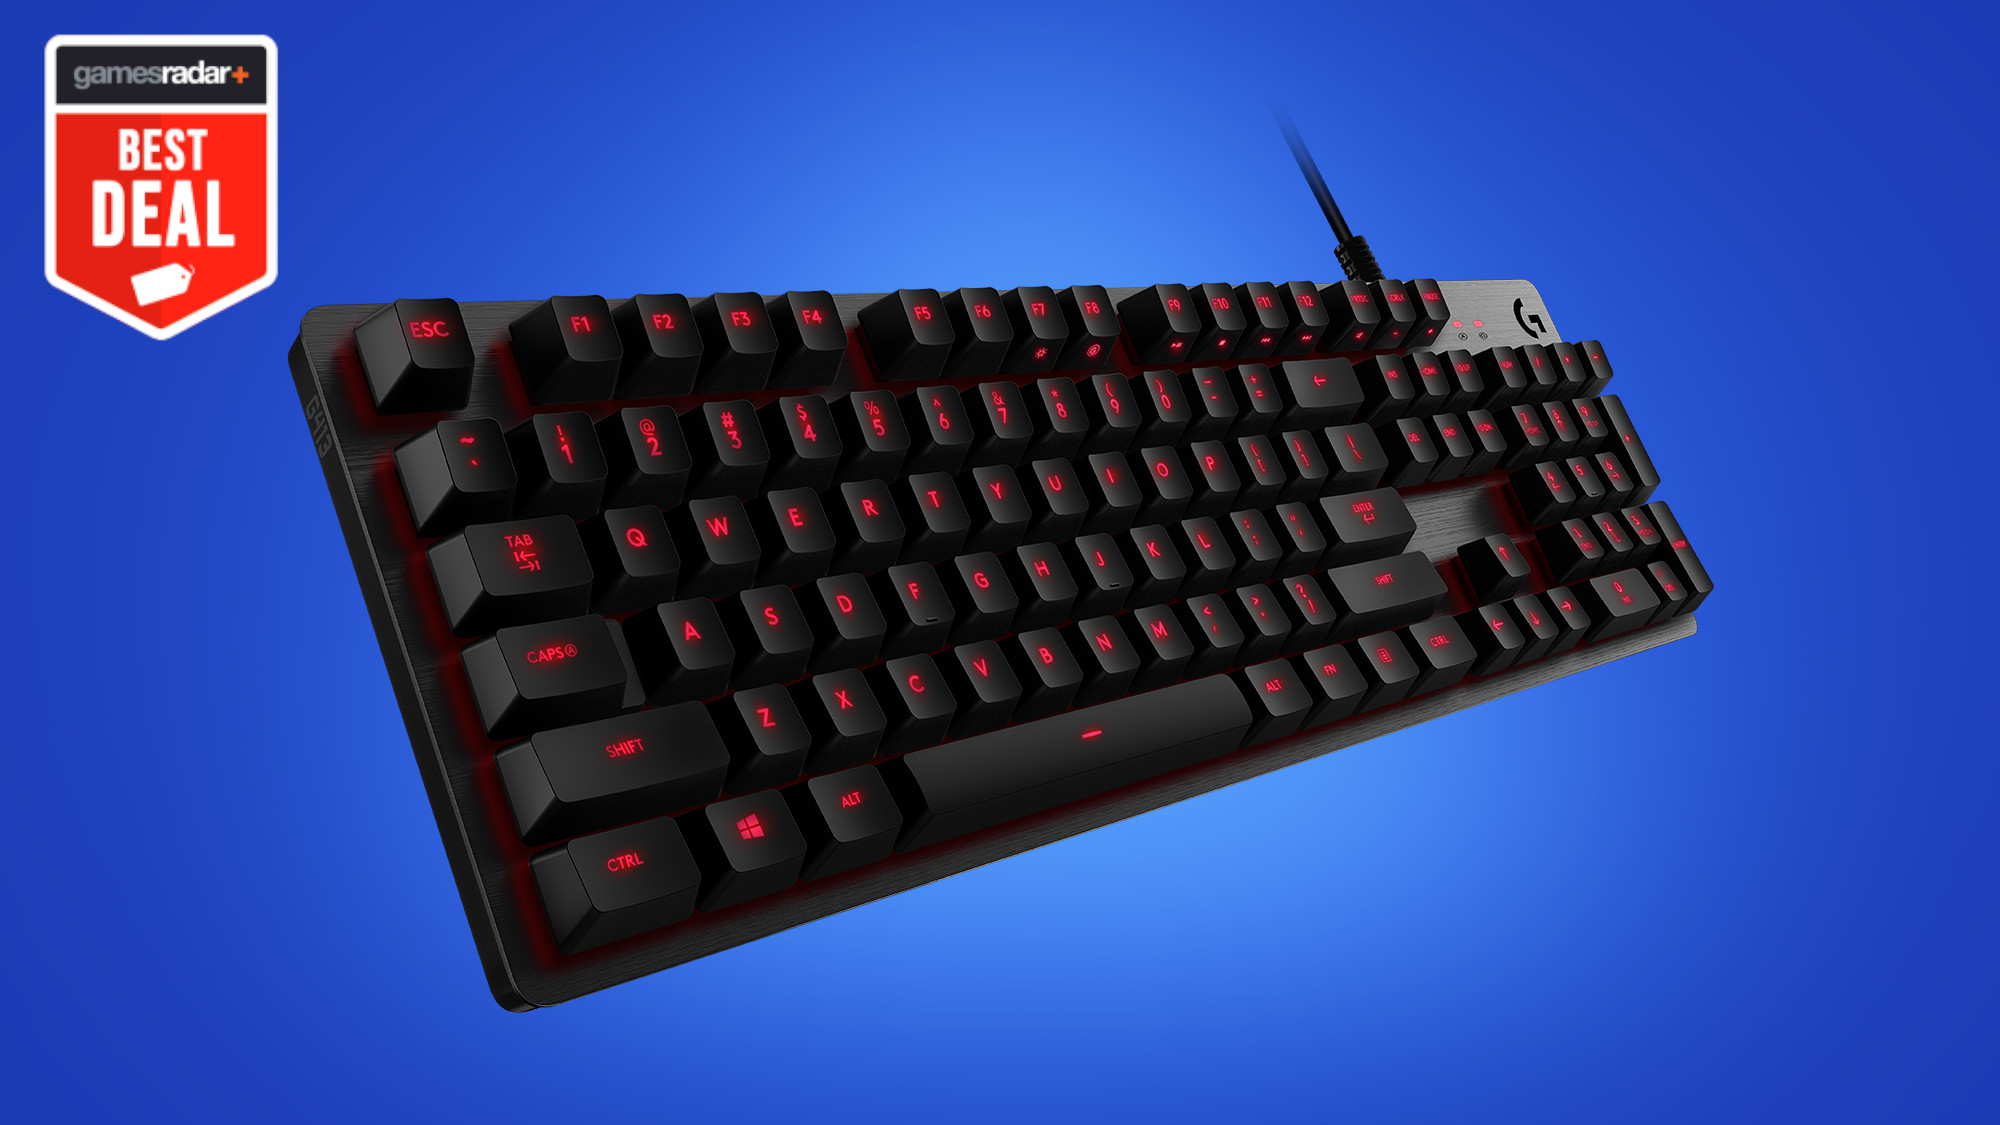 Quick – this Logitech mechanical gaming keyboard is now under $50